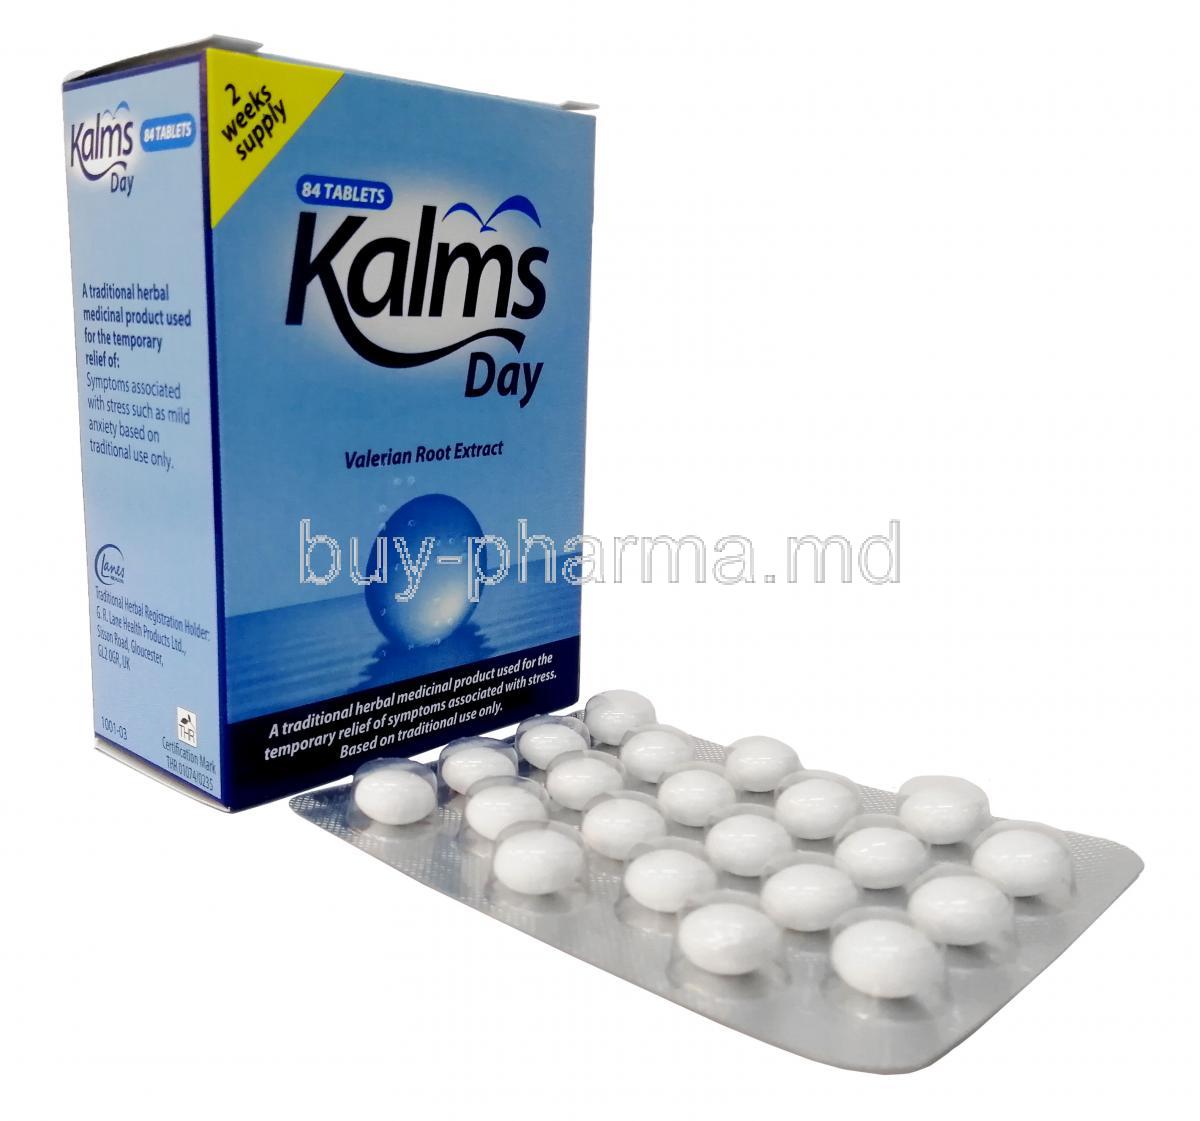 Kalms Day,Valerian Root Extract 33.75mg, G R Lanes, Box front view, blisterpack